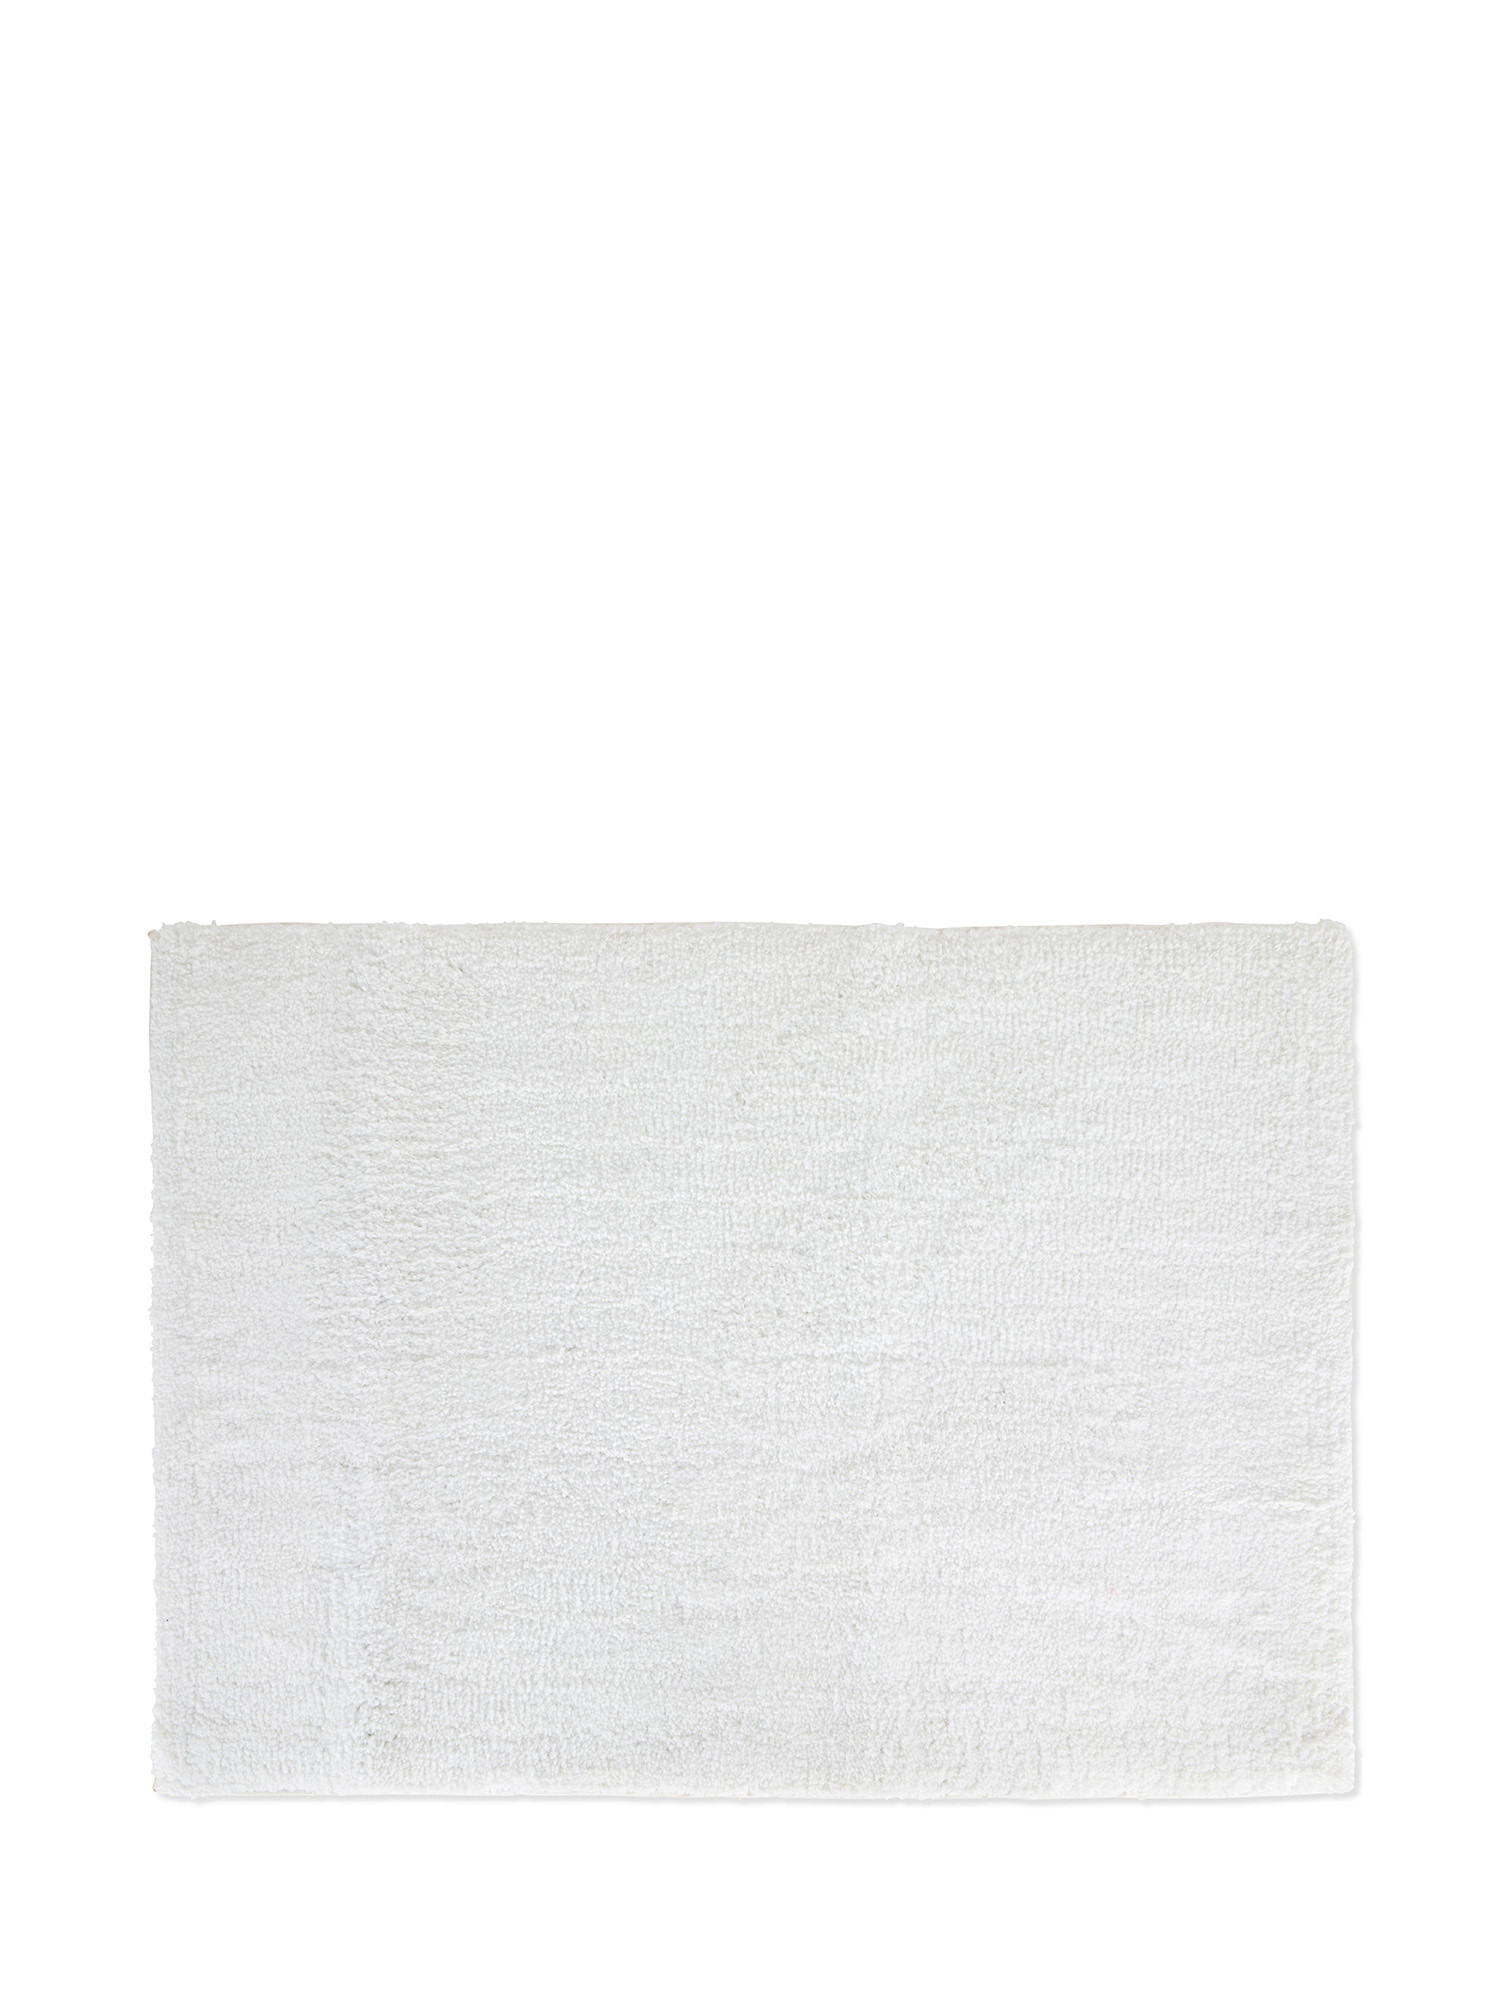 Bath mat in micro polyester, White, large image number 0